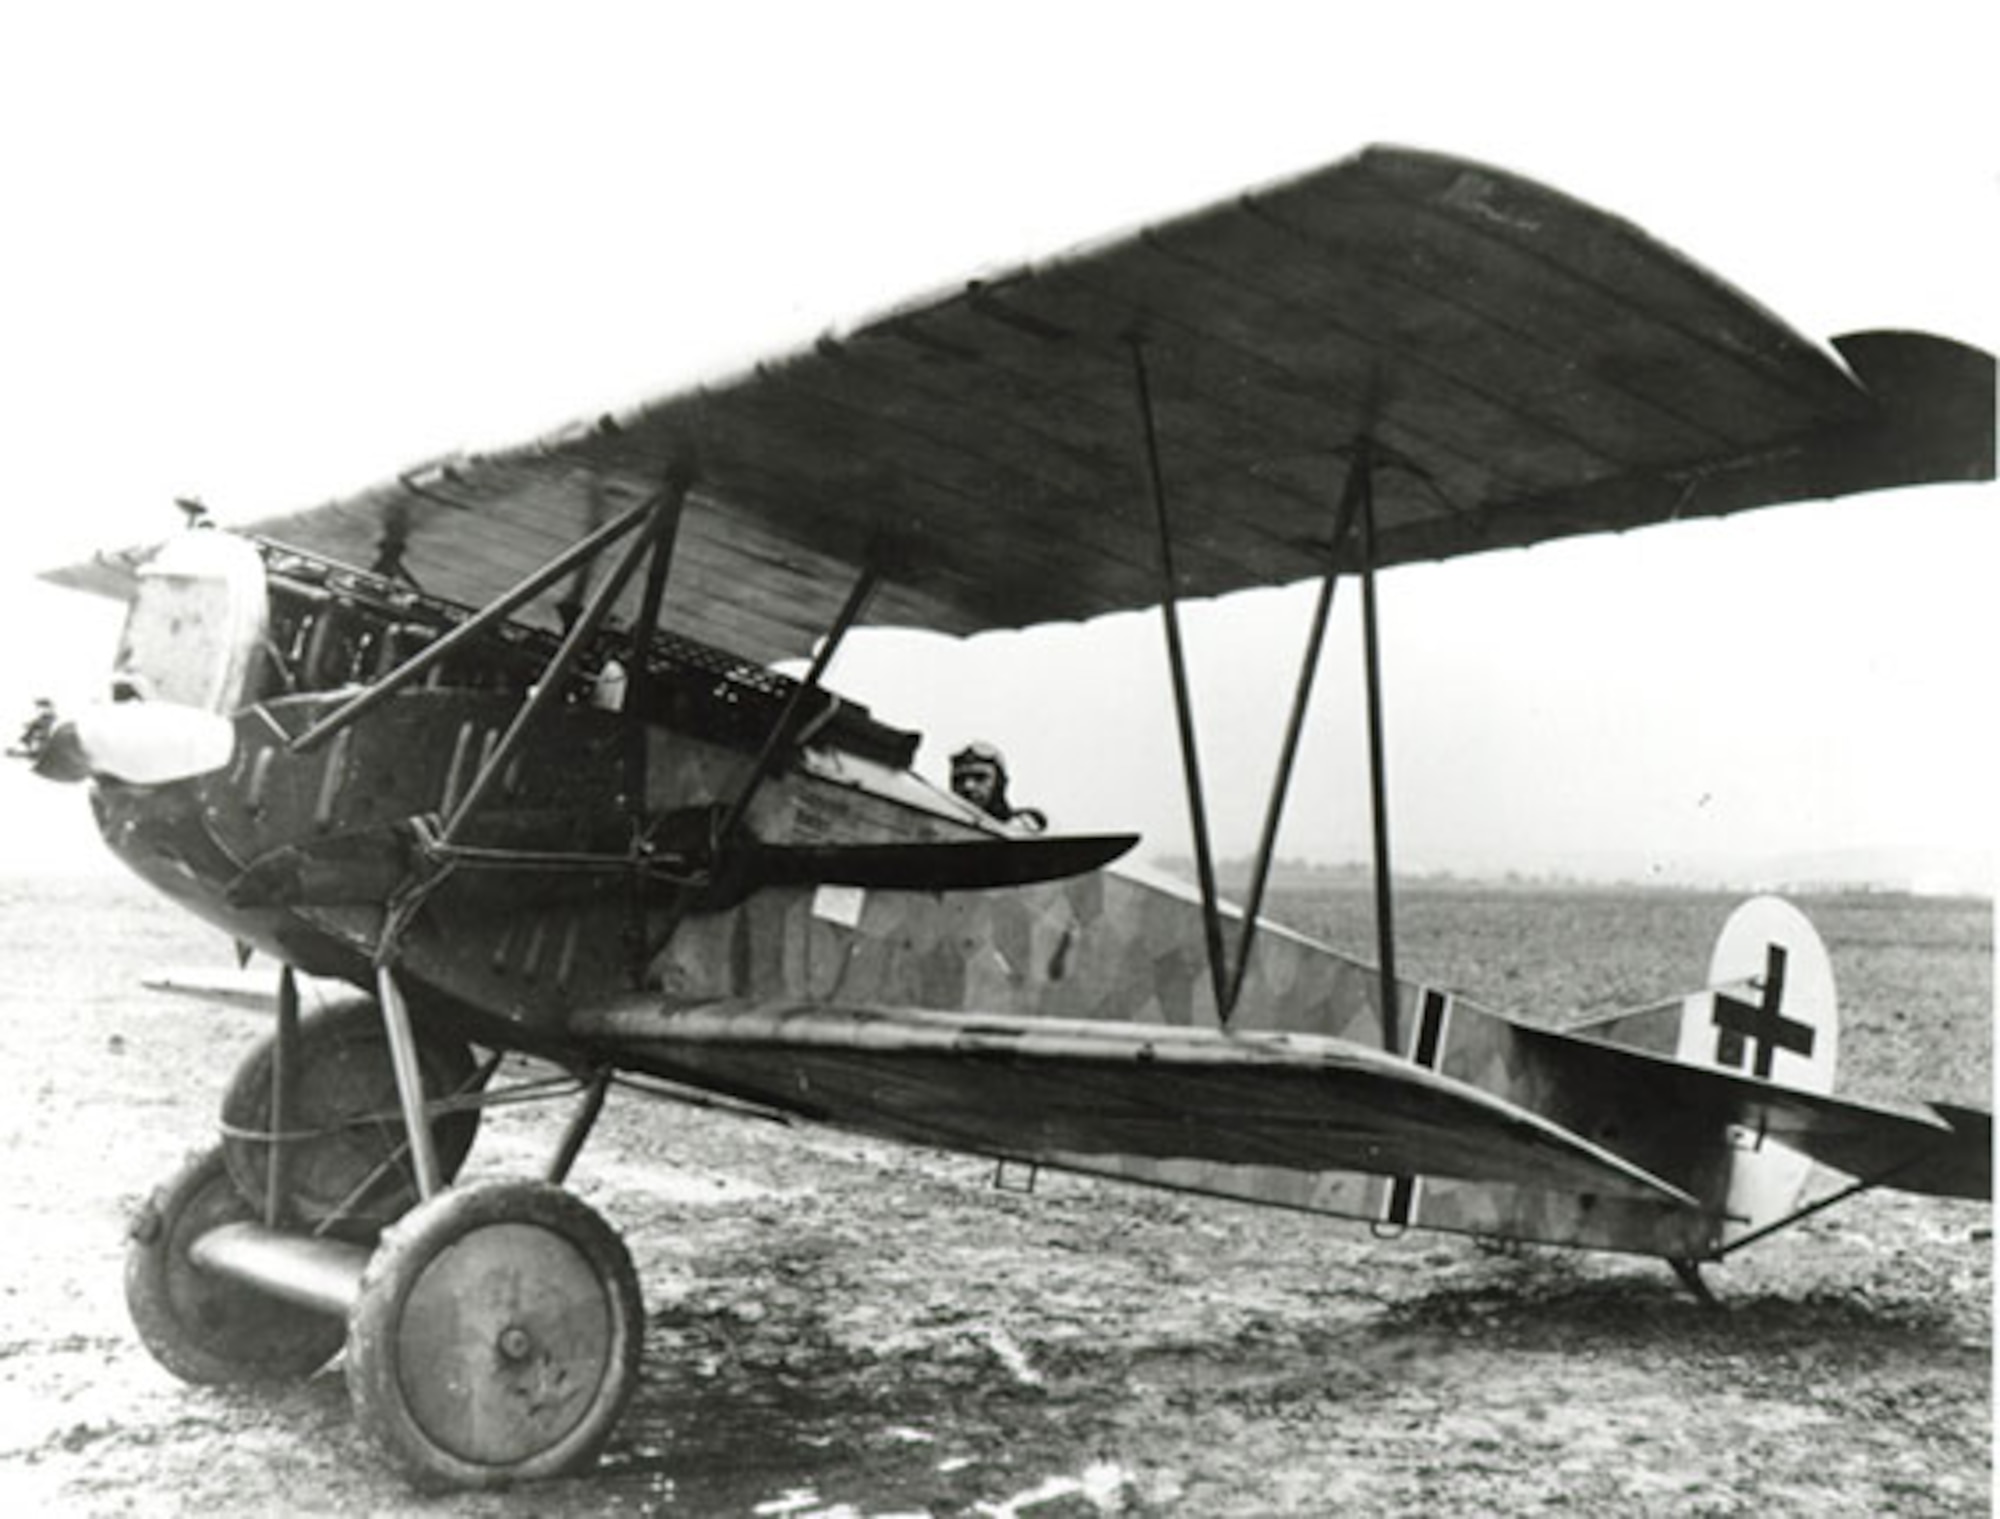 Fred C. Nelson is seen in a German Fokker biplane, circa 1920. Nelson, who retired as an Air Force colonel in 1950, made a name as a pilot at several air shows during the years between World War I and World War II. He flew this aircraft in several shows in the 1920s and set an air speed record at a show at Selfridge Air National Guard Base in 1934. (U.S. Air Force photo)